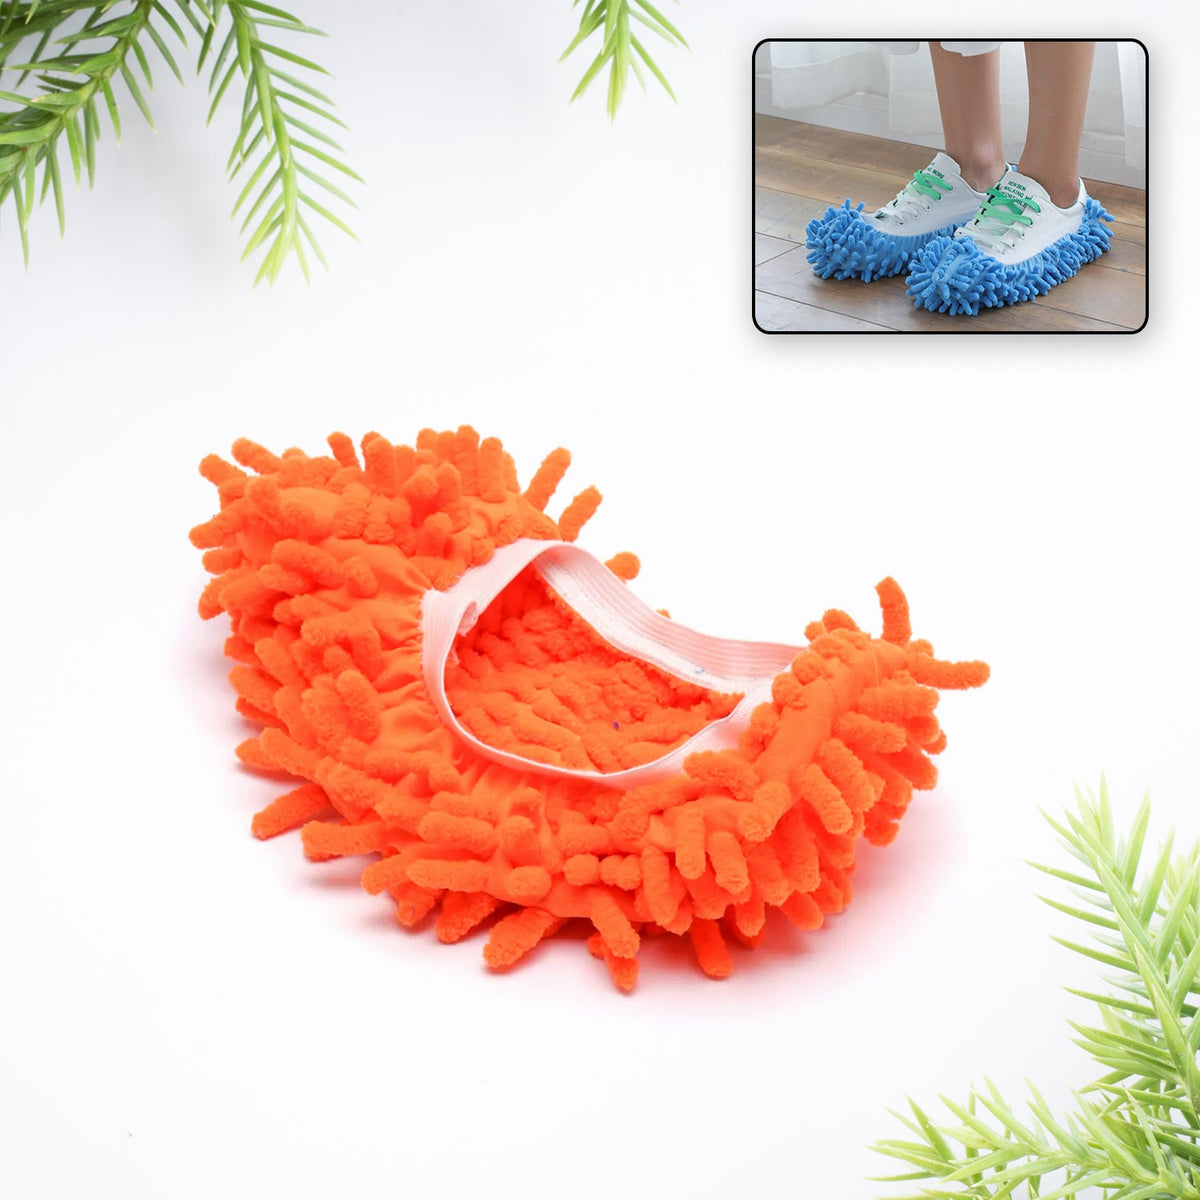 0531  1Pc Mop Slipper Shoes Cover, Floor Dust Cleaning Household Wiping Mops Head, Floor Cleaning Shoes Cover for House (1 Pc)